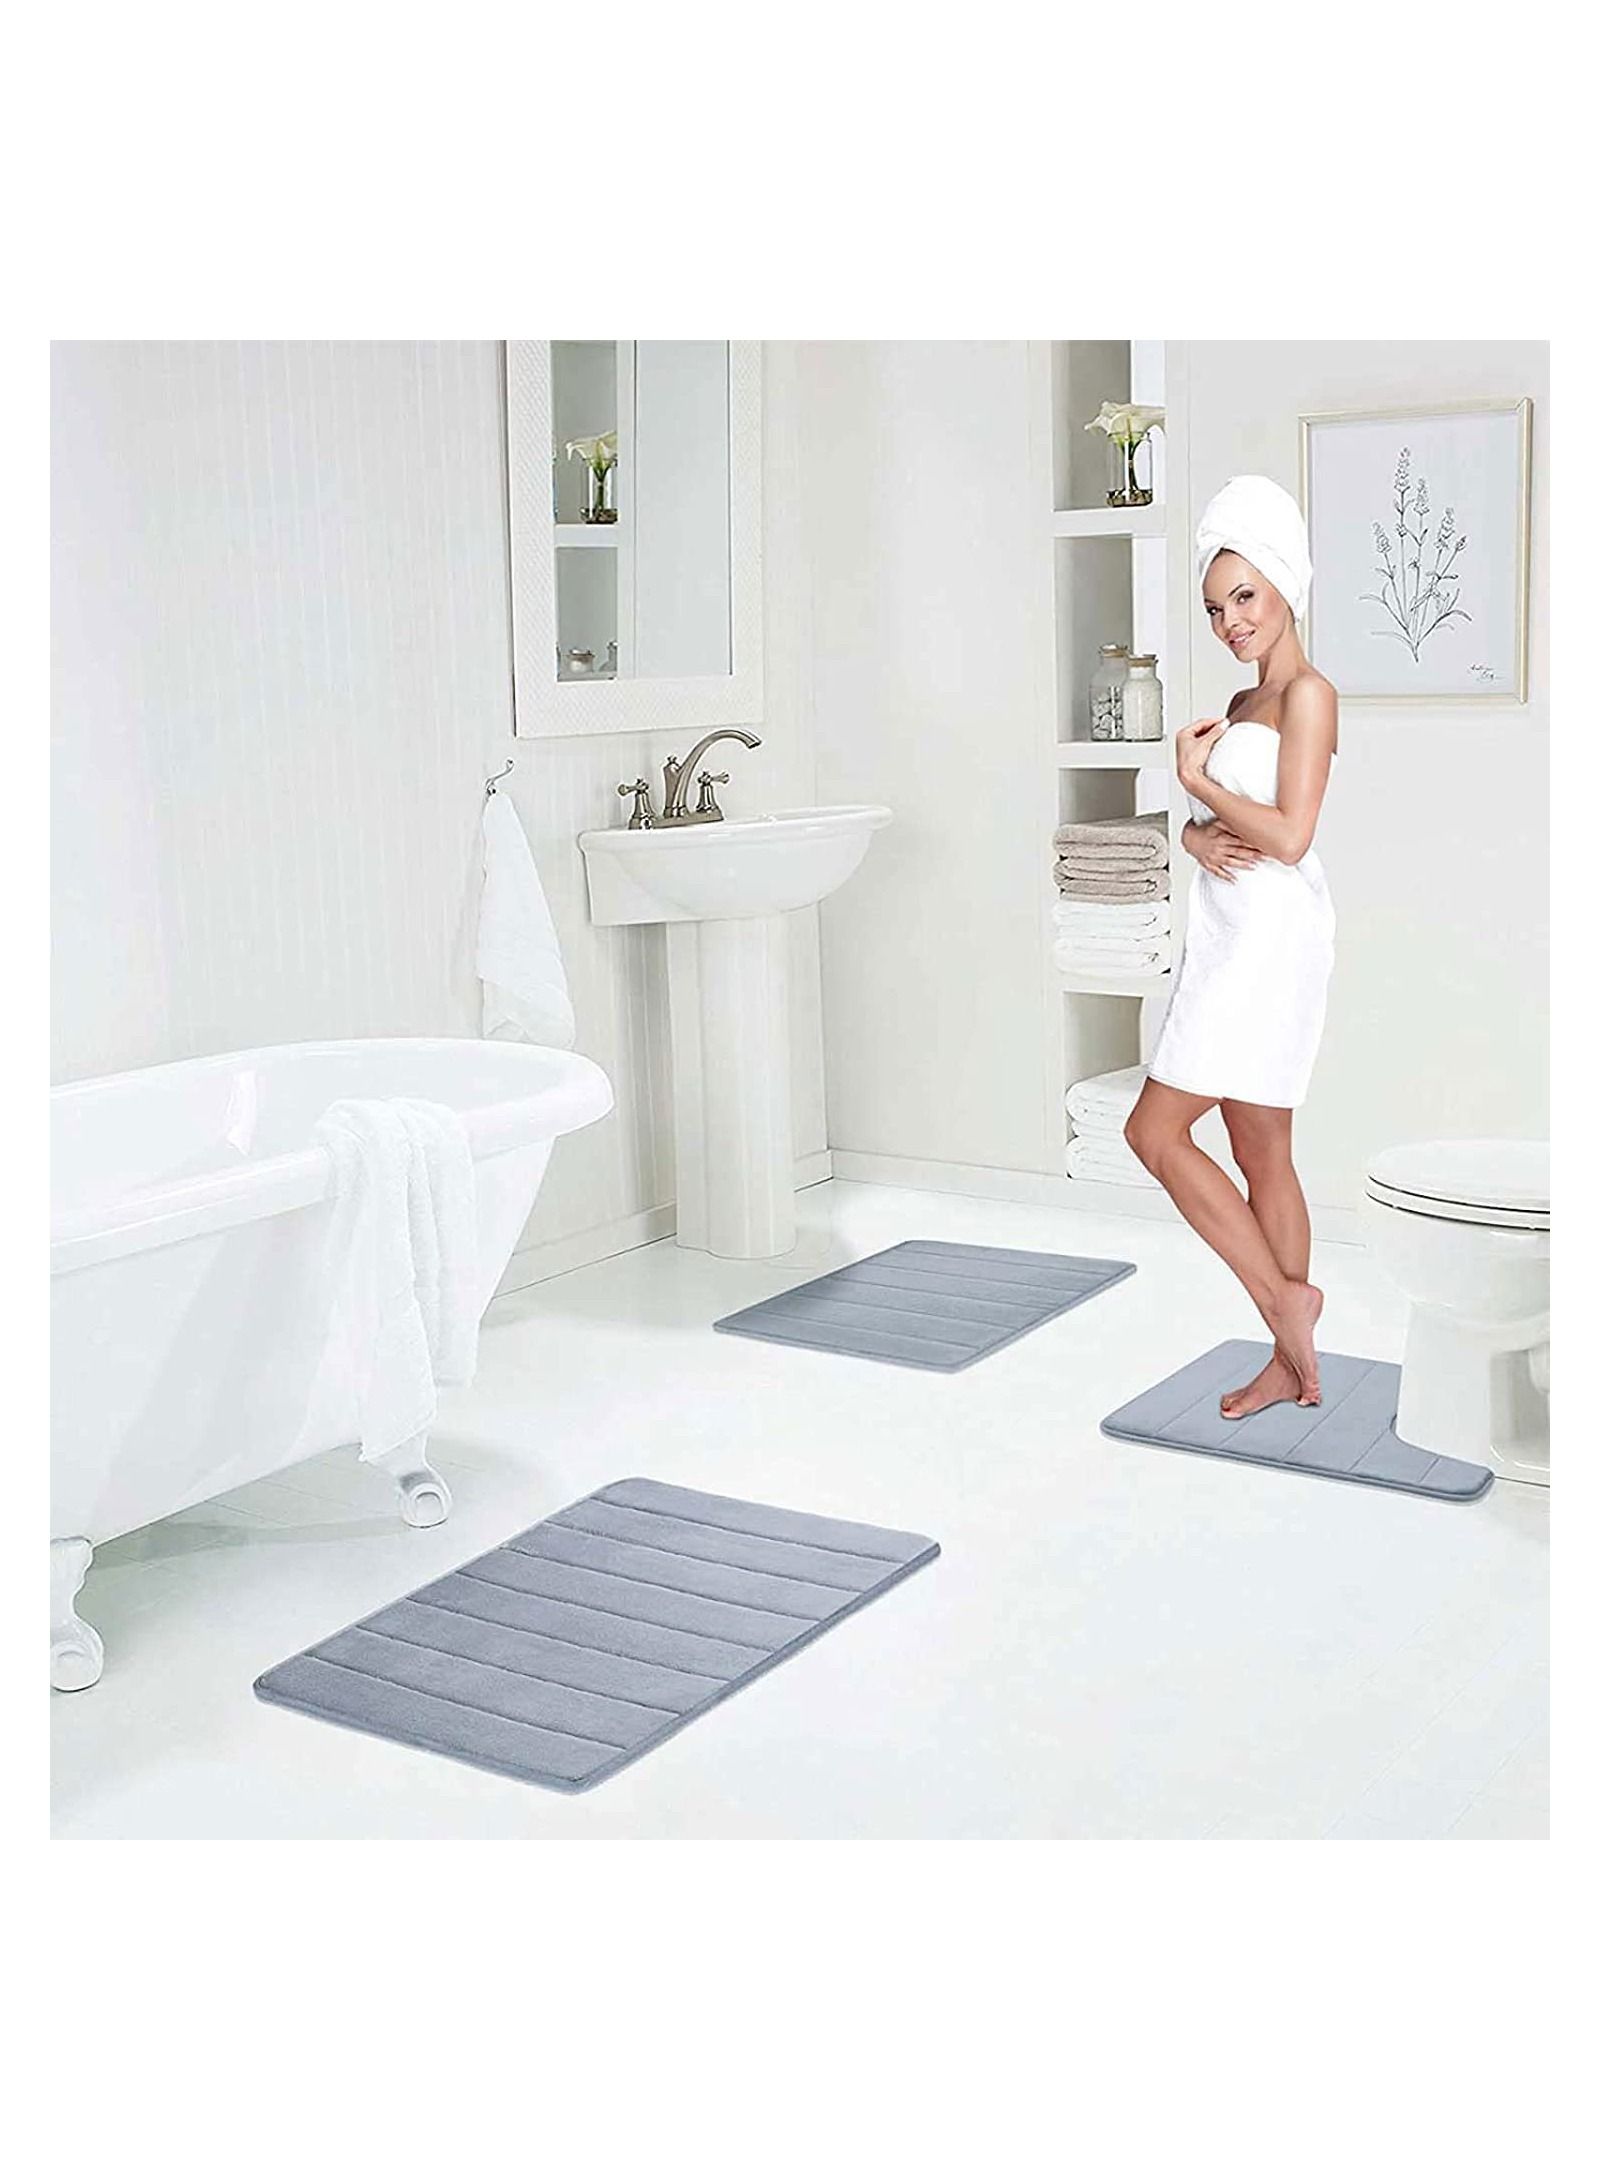 Non Slip Mat With Memory Foam Super Absorbent Bath Rugs Washable Kitchen Mats is Machine Wash Easy to Dry for Bathroom Floor Rugs Pack of 2 